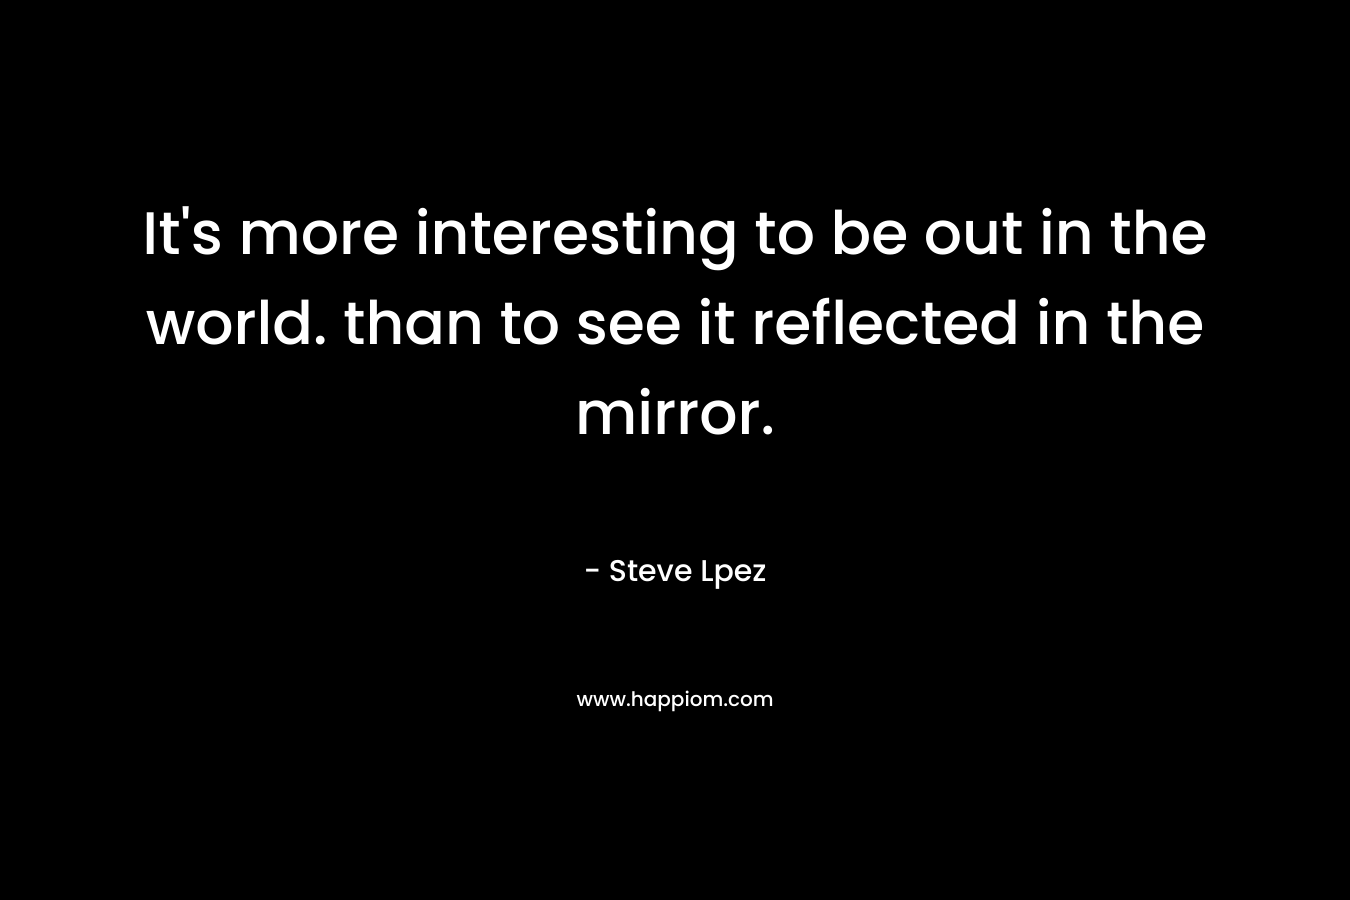 It's more interesting to be out in the world. than to see it reflected in the mirror.